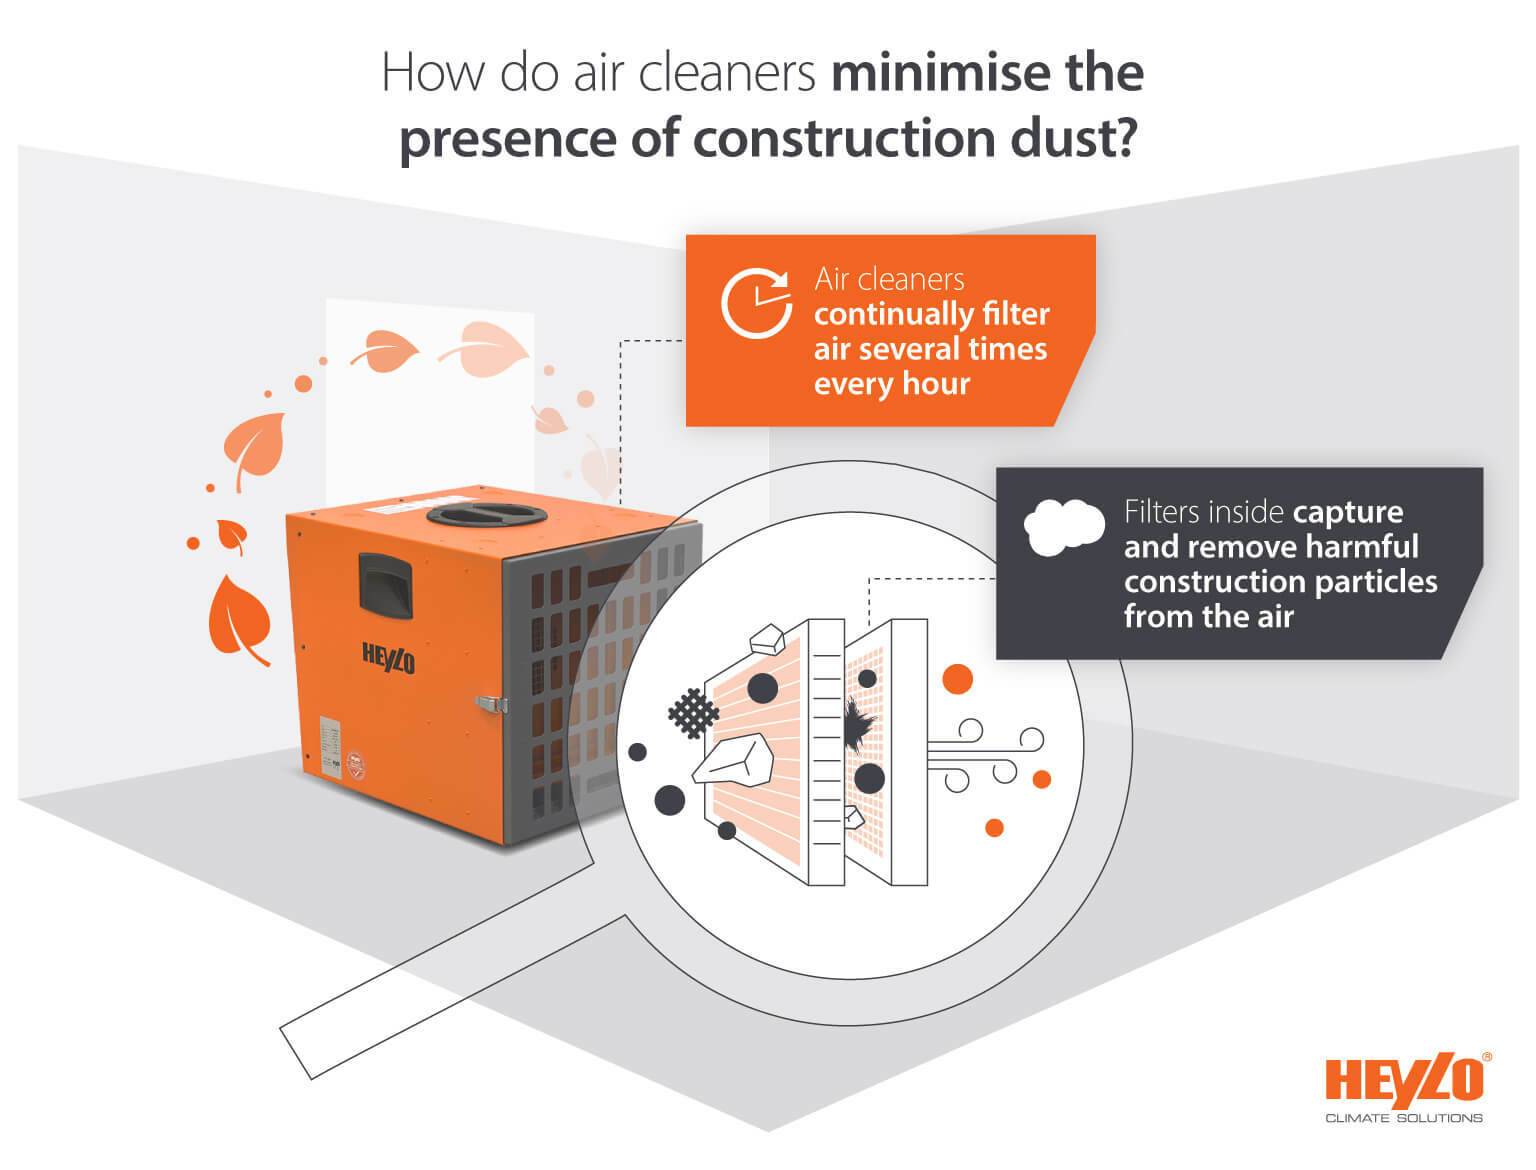 How air cleaners control construction dust for health and safety - Infographic image